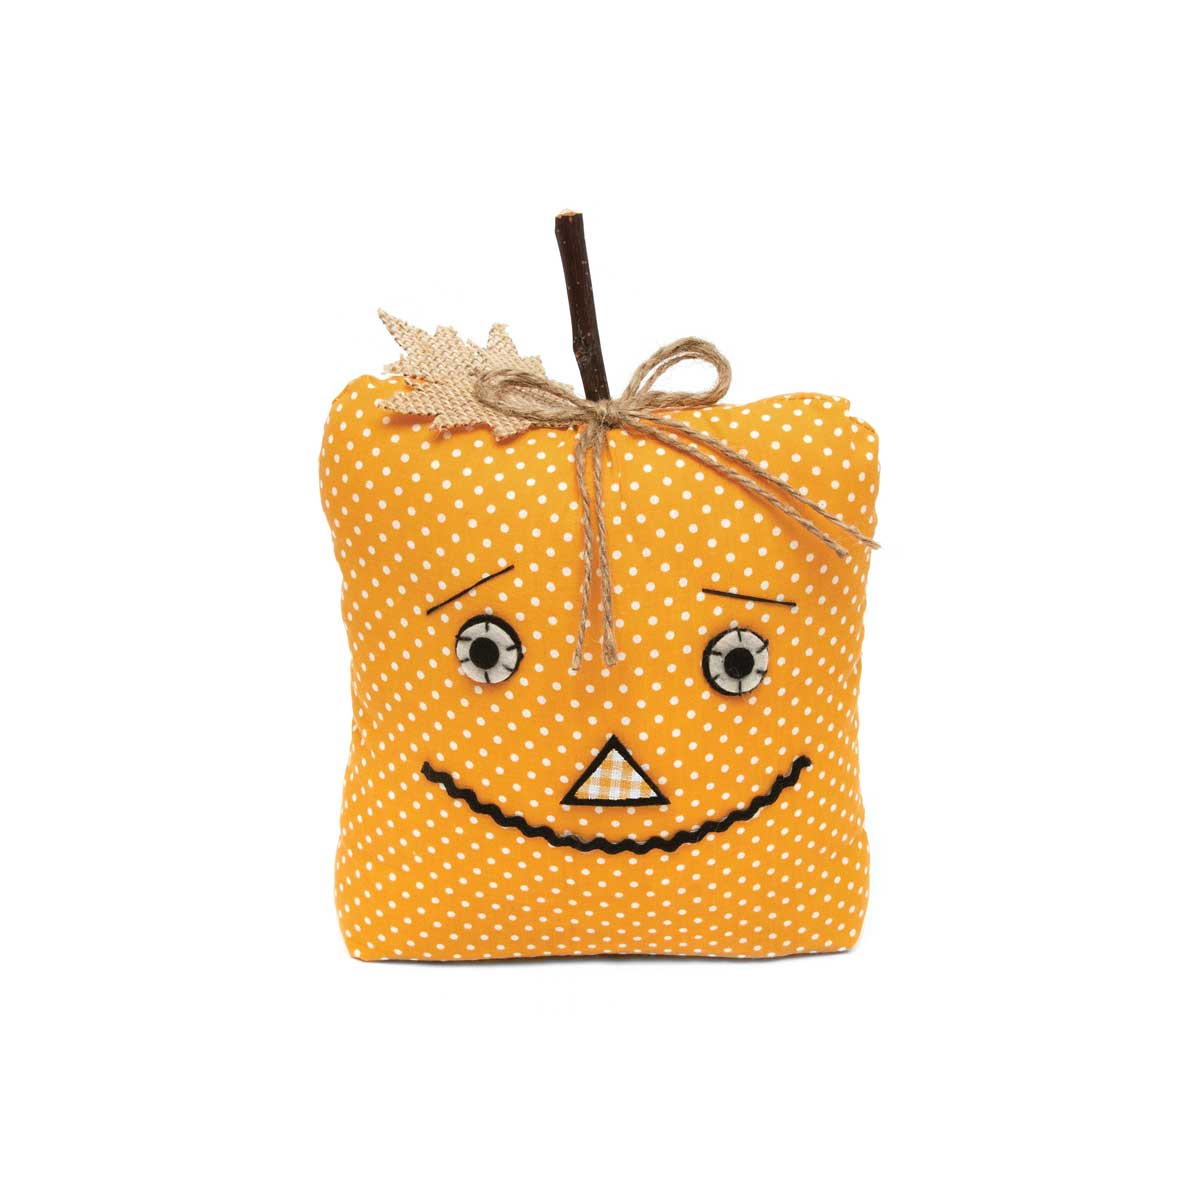 PILLOW PUMPKIN FACE SQUARE 7IN X 3.5IN X 7IN MUSTARD/WHITE